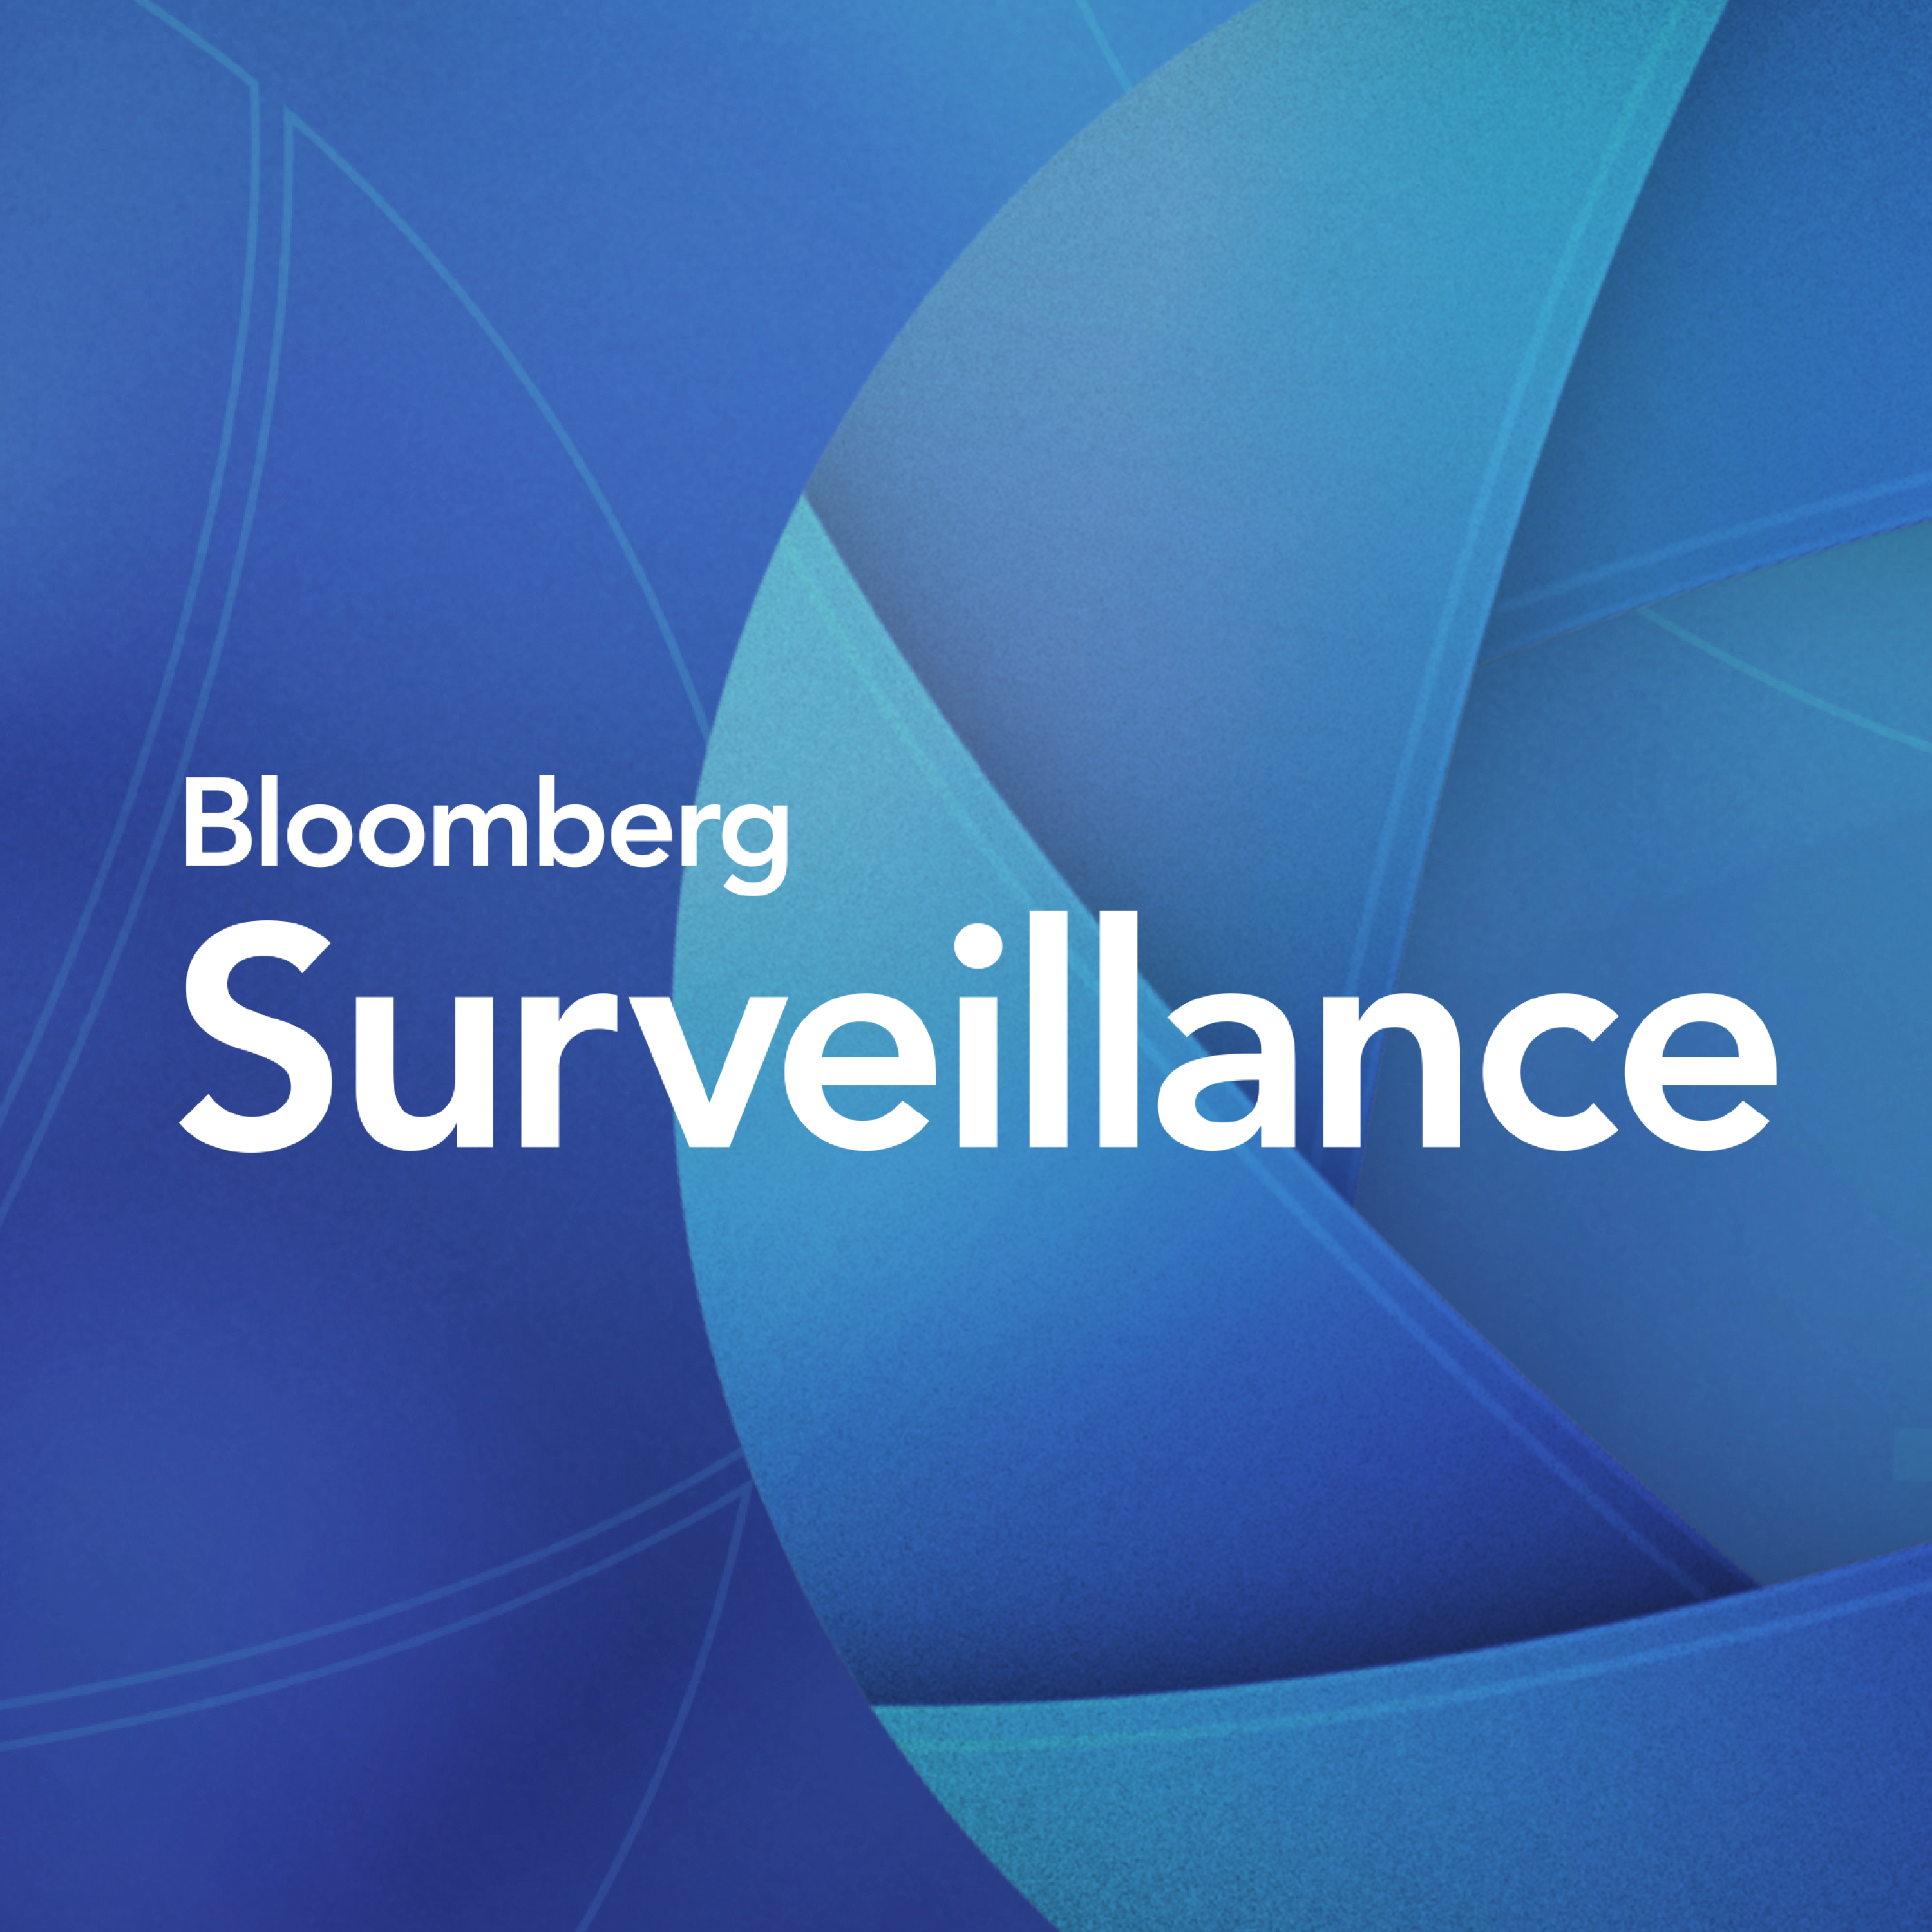 Surveillance: Critical Year For Climate, Says Carney